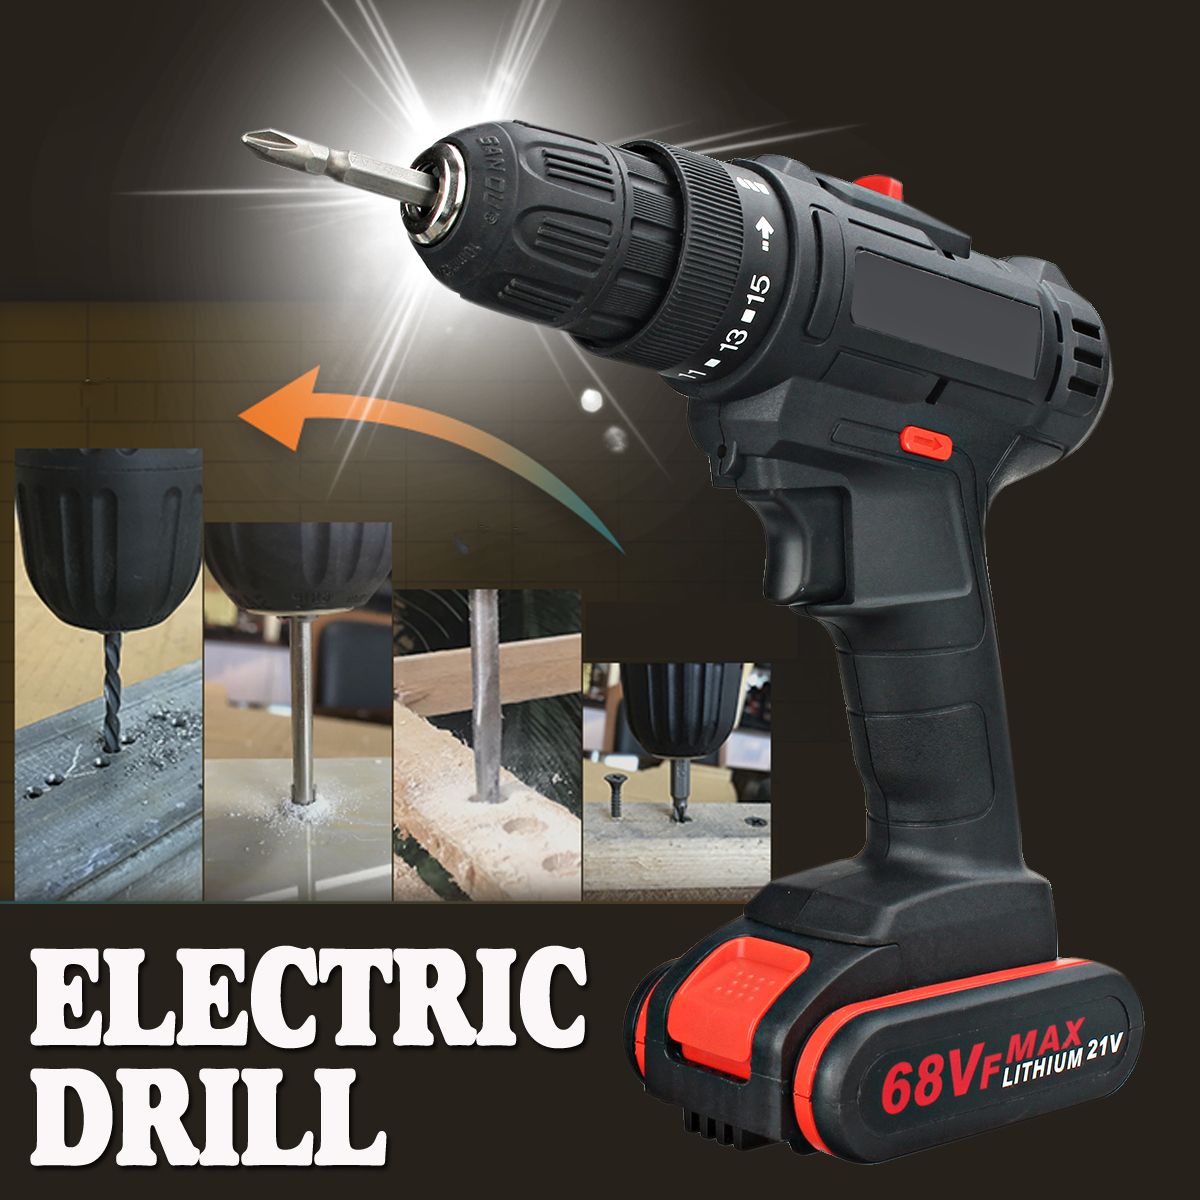 68VF-Cordless-Lithium-Ion-DrillDriver-Rechargable-Electric-Drill-Adjustable-3200rmin-2-Speed-Hand-Dr-1575819